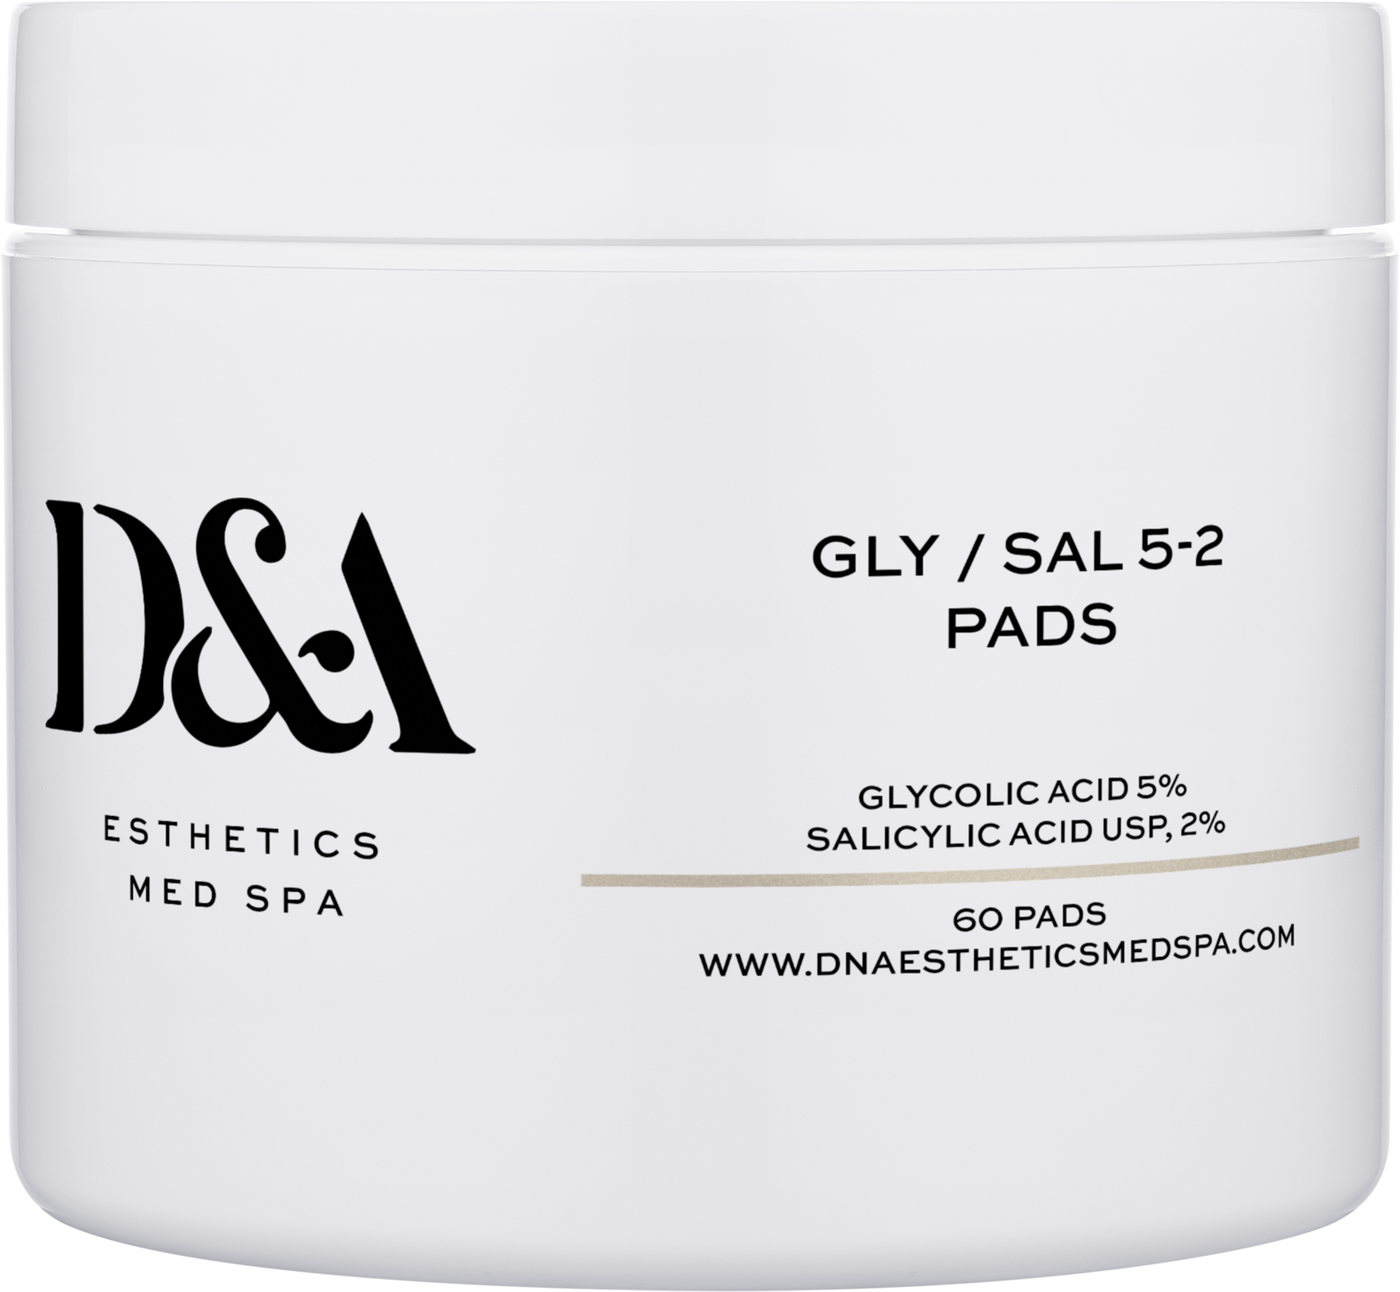 Gly/Sal 5-2 Exfoliating Pads